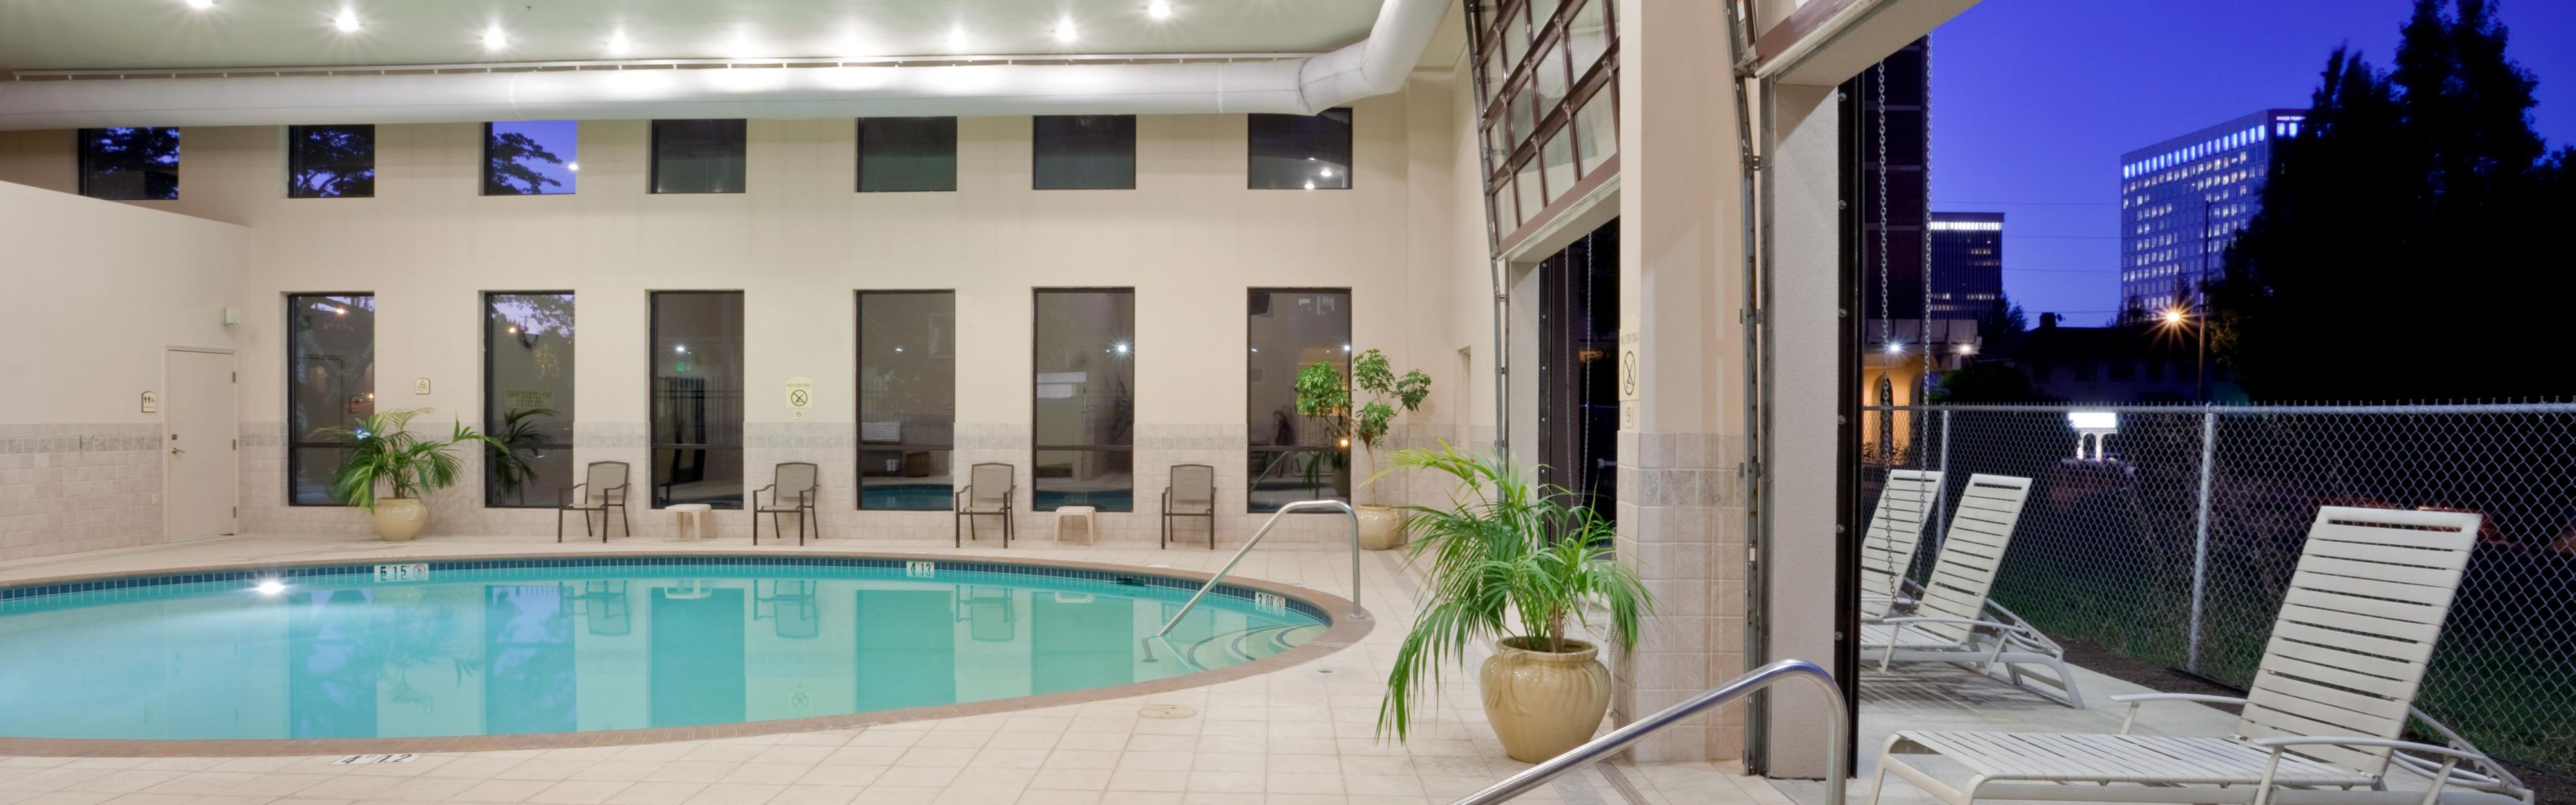 Saltwater Pool & Spa: Crowne Plaza Portland Downtown Convention